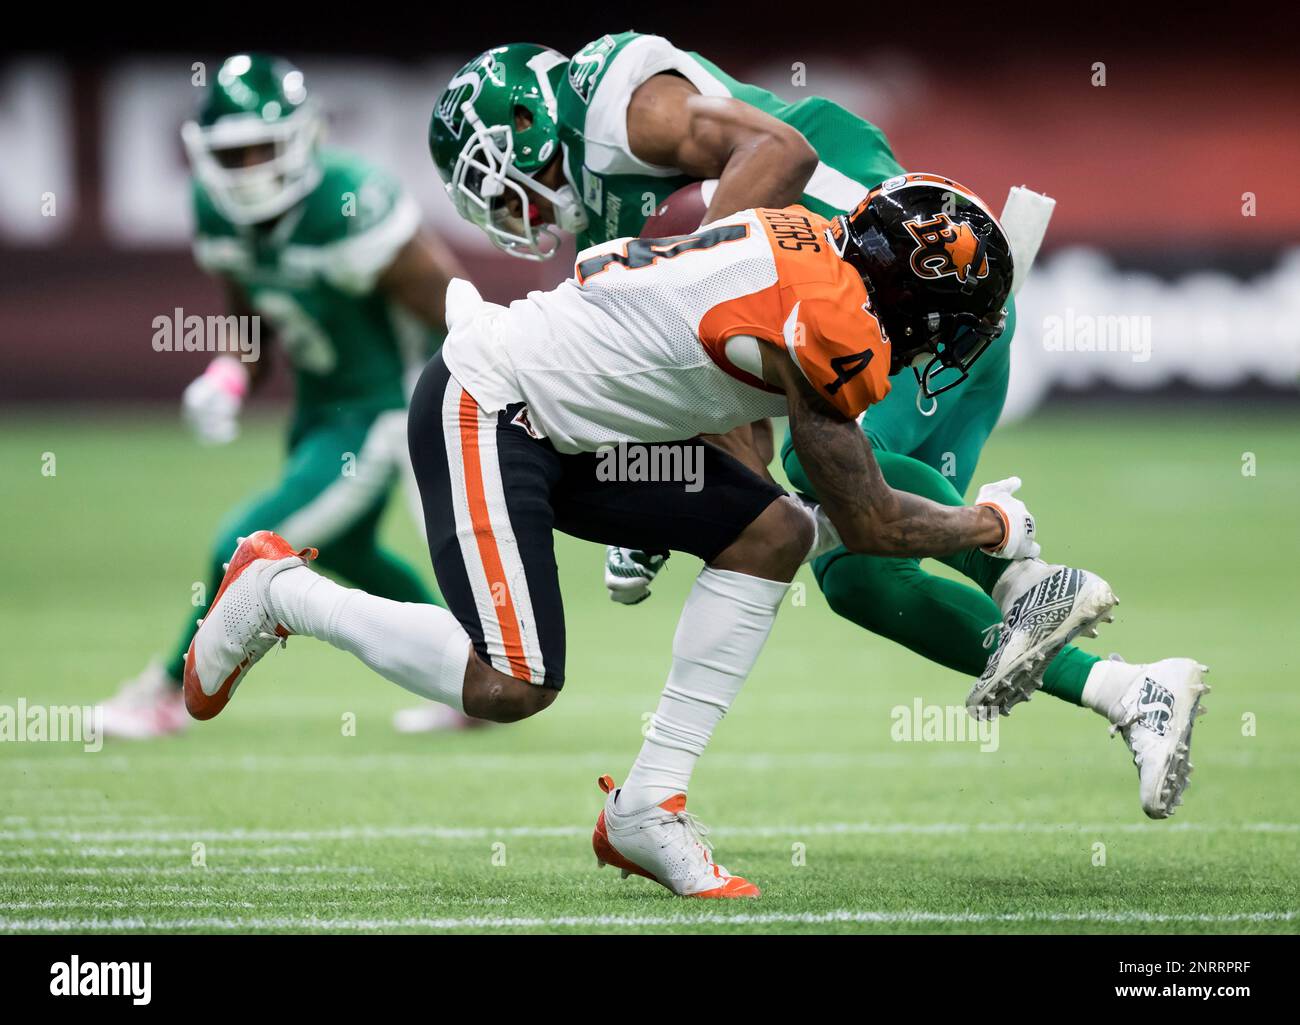 https://c8.alamy.com/comp/2NRRPRF/bc-lions-garry-peters-front-tackles-saskatchewan-roughriders-shaq-evans-during-the-first-half-of-a-canadian-football-league-game-friday-oct-18-2019-in-vancouver-british-columbia-darryl-dyckthe-canadian-press-via-ap-2NRRPRF.jpg